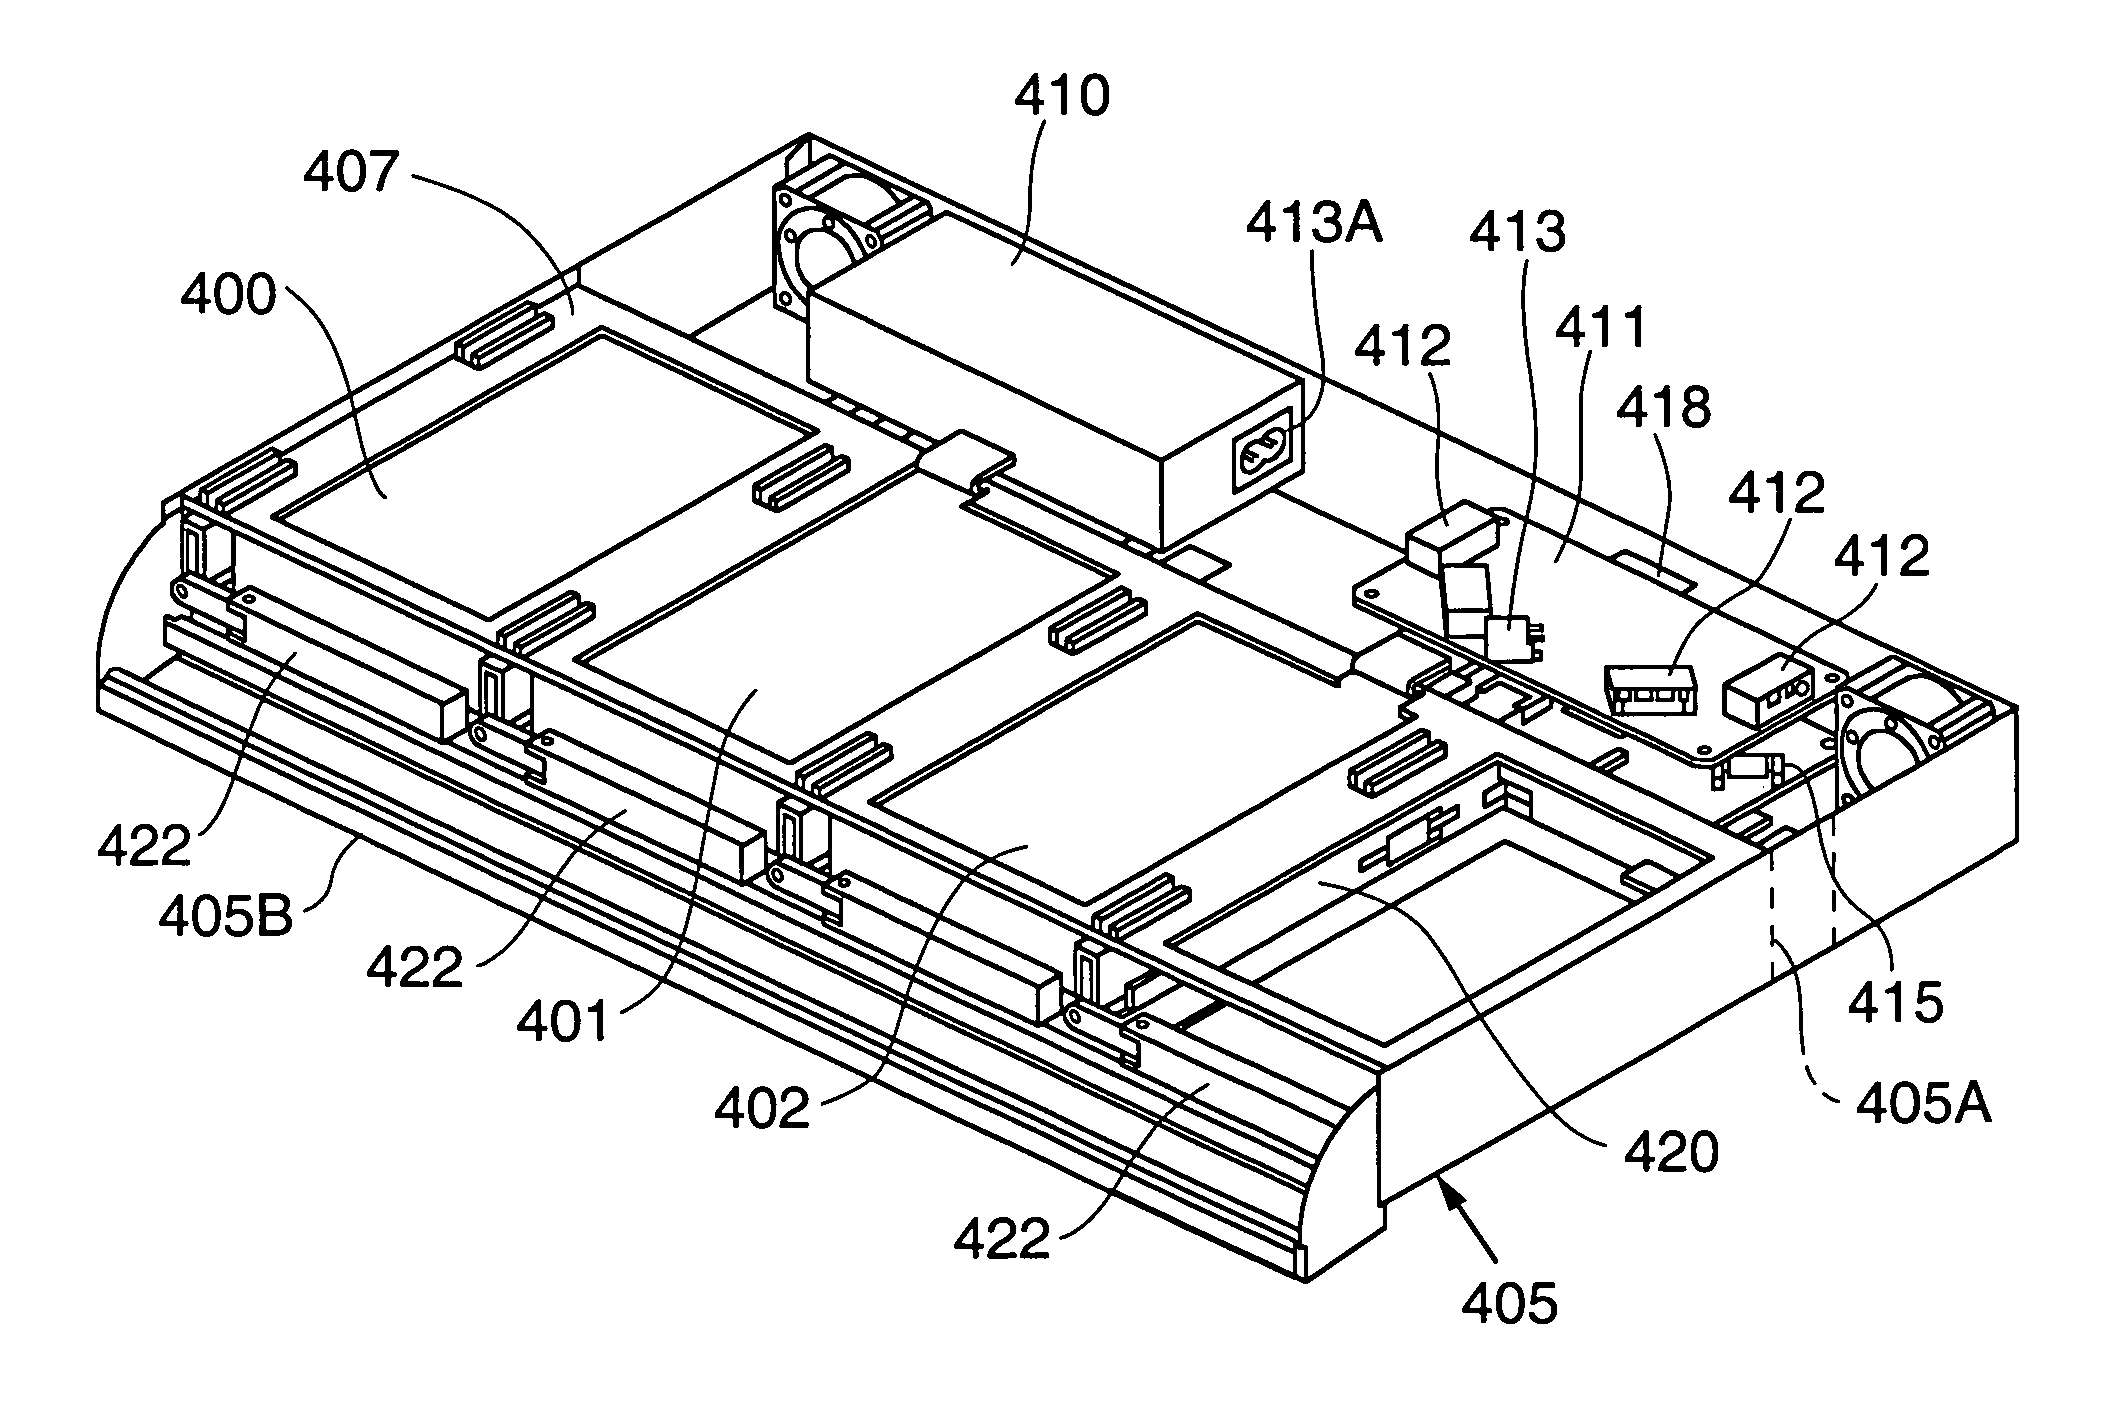 Apparatus for removably securing storage components in an enclosure